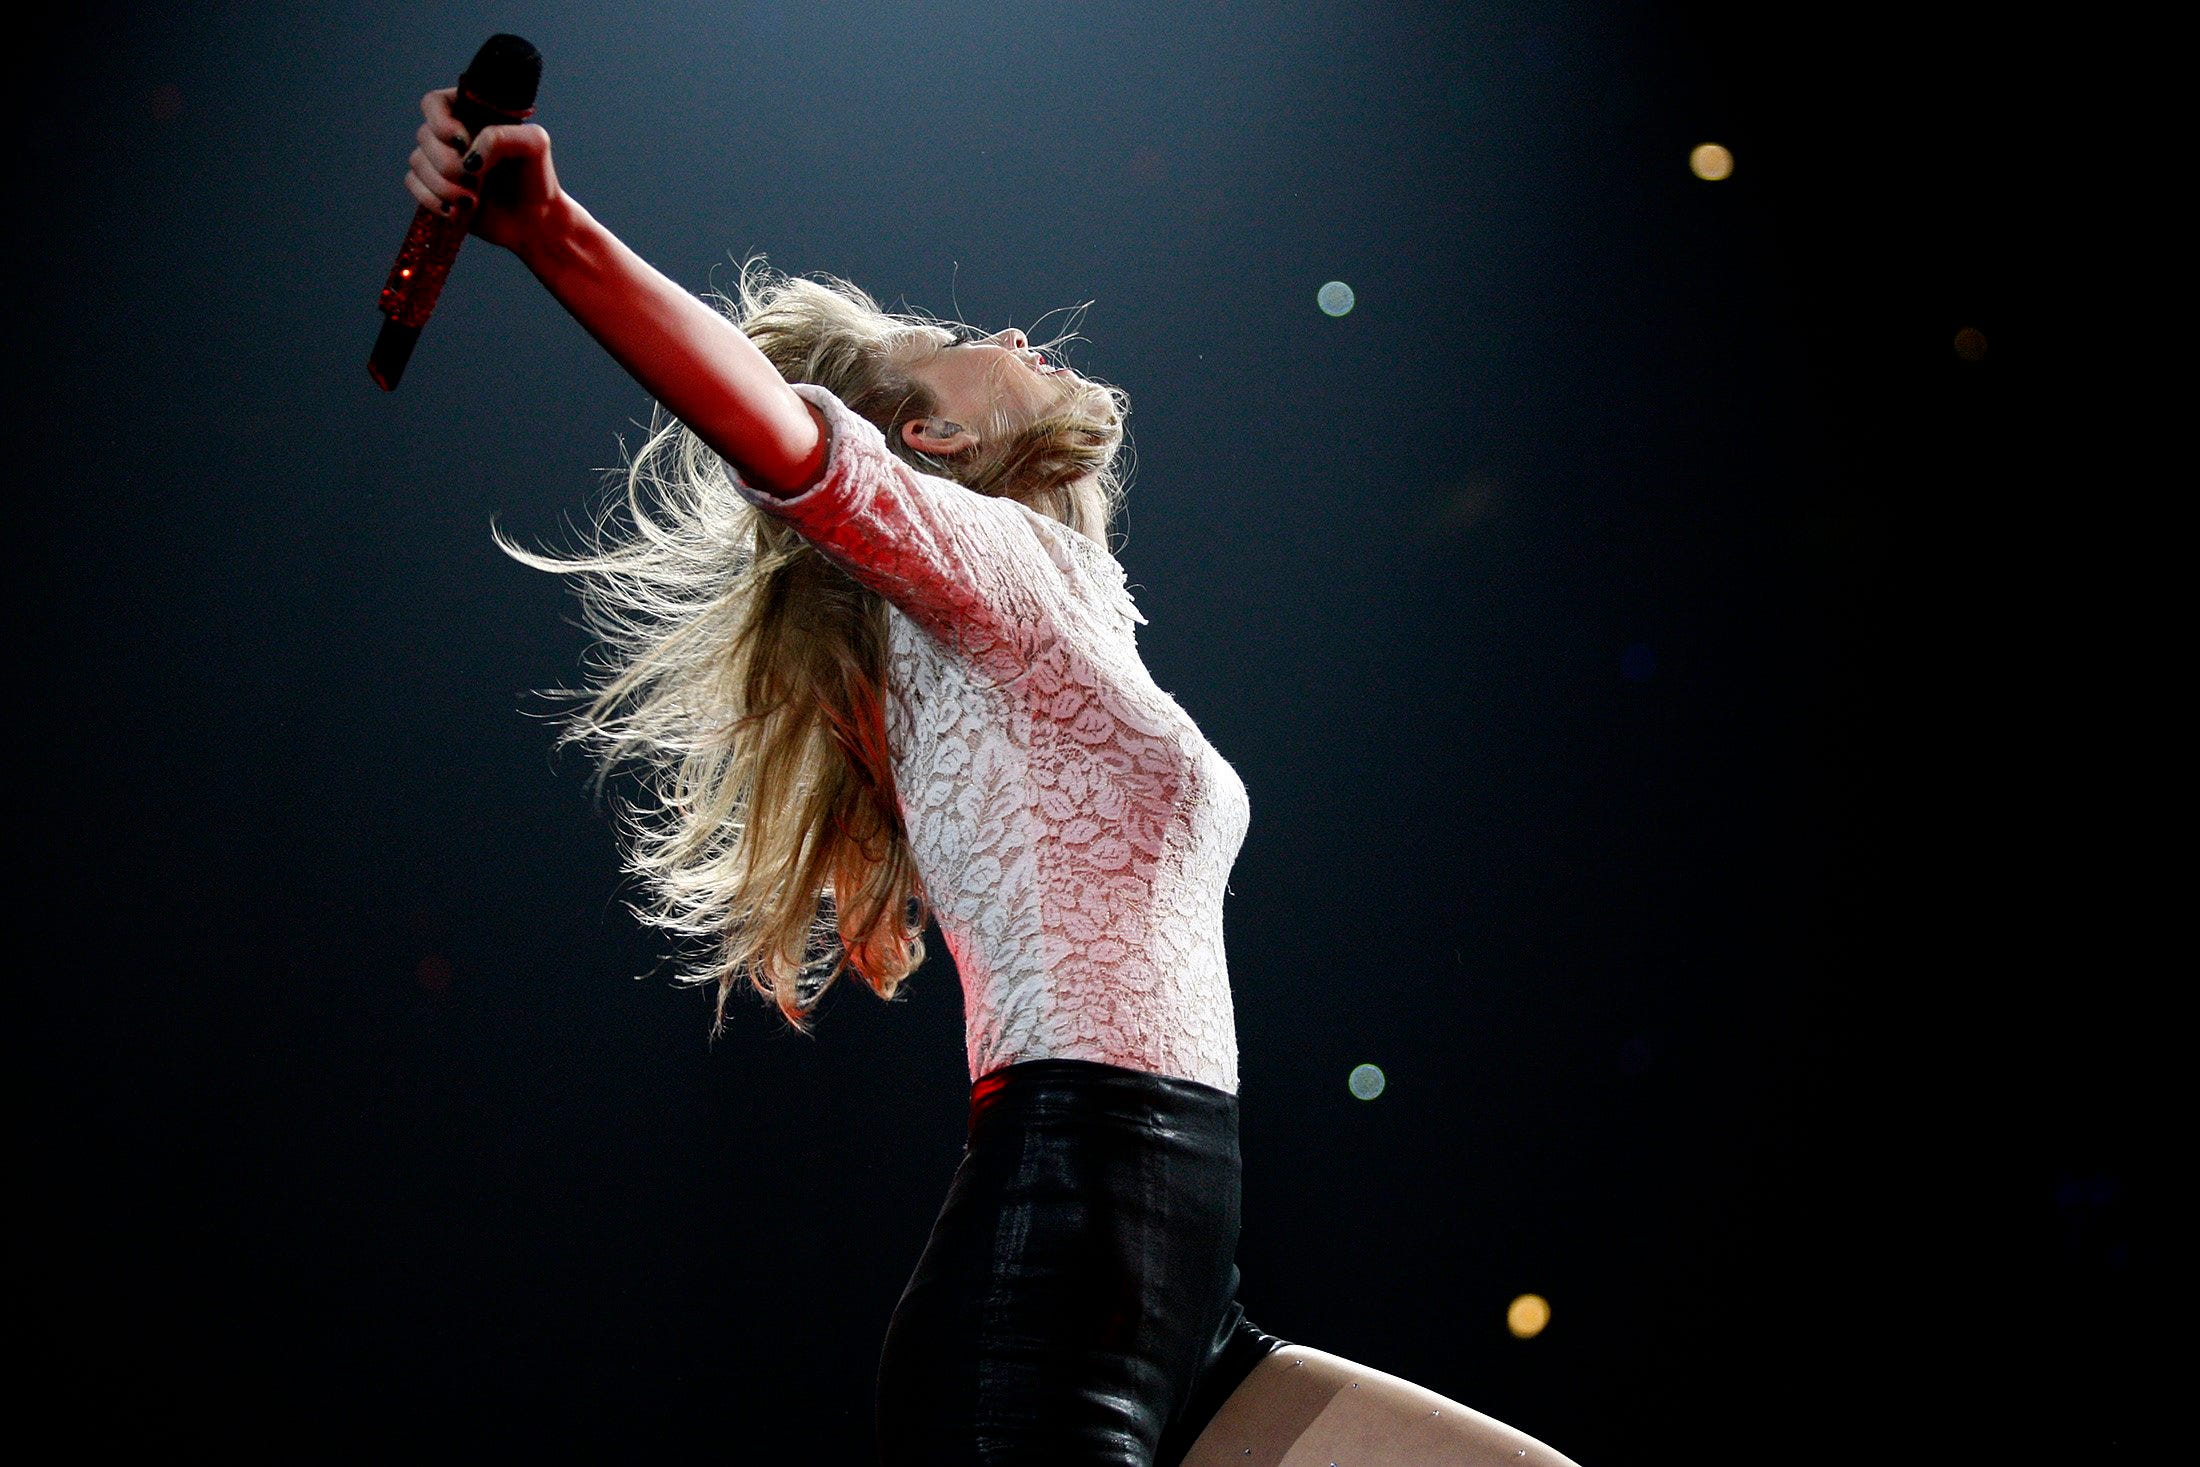 Taylor Swift performs at Nationwide Arena during her Red Tour on Wednesday, May 8, 2013. (Columbus Dispatch photo by Jonathan Quilter)